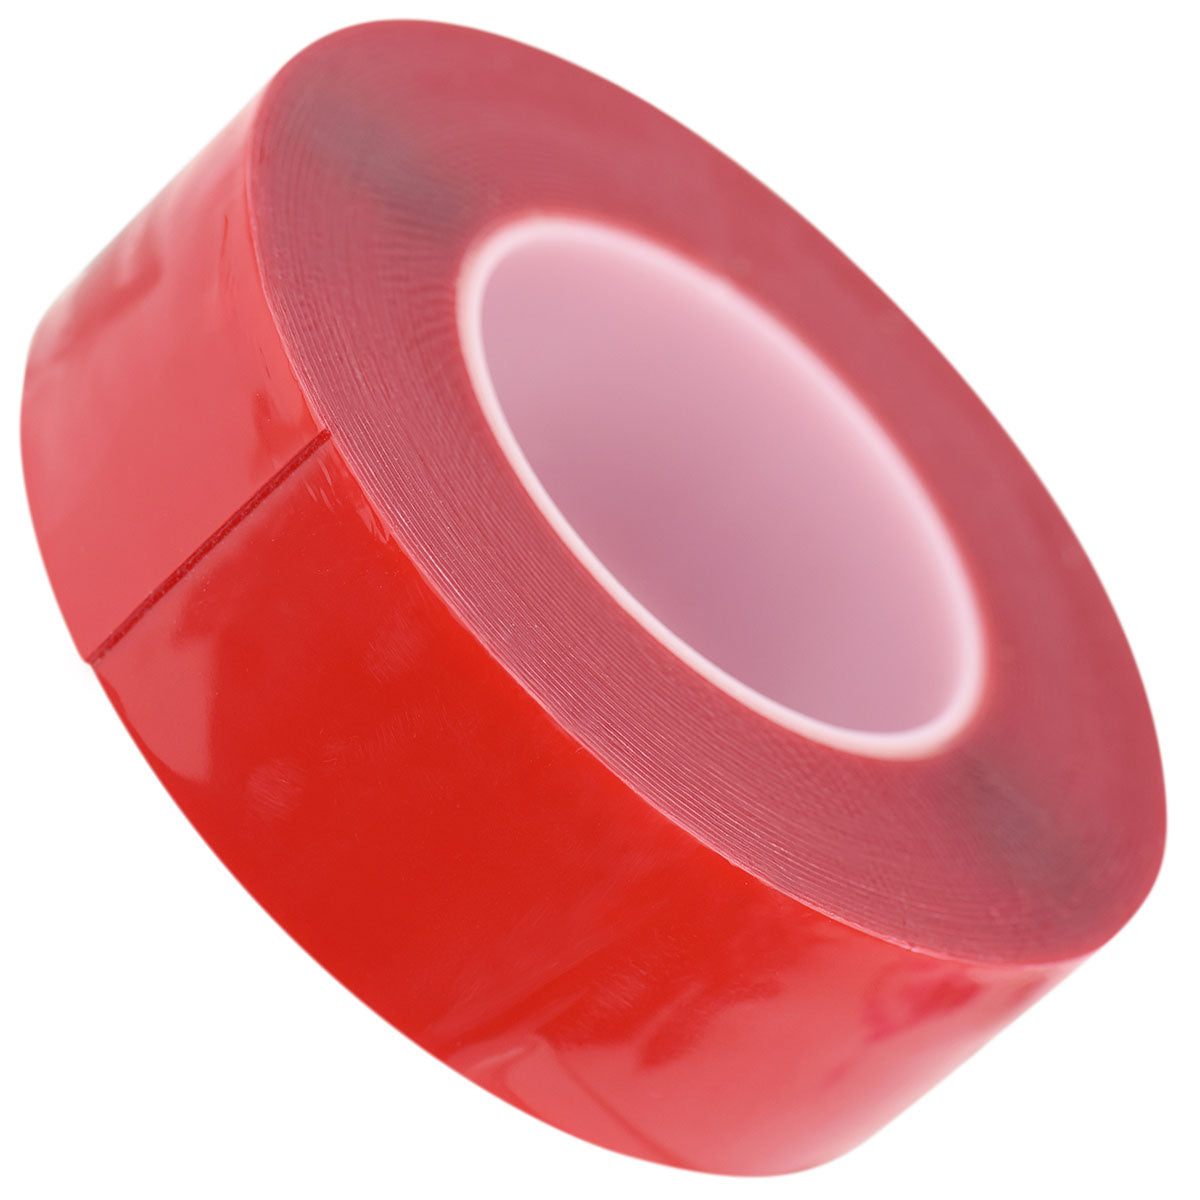 50mm x 1mm x 10 meters Multi-Purpose High Strength Transparent Acrylic Gel Adhesive Double Sided Tape Roll No Residue